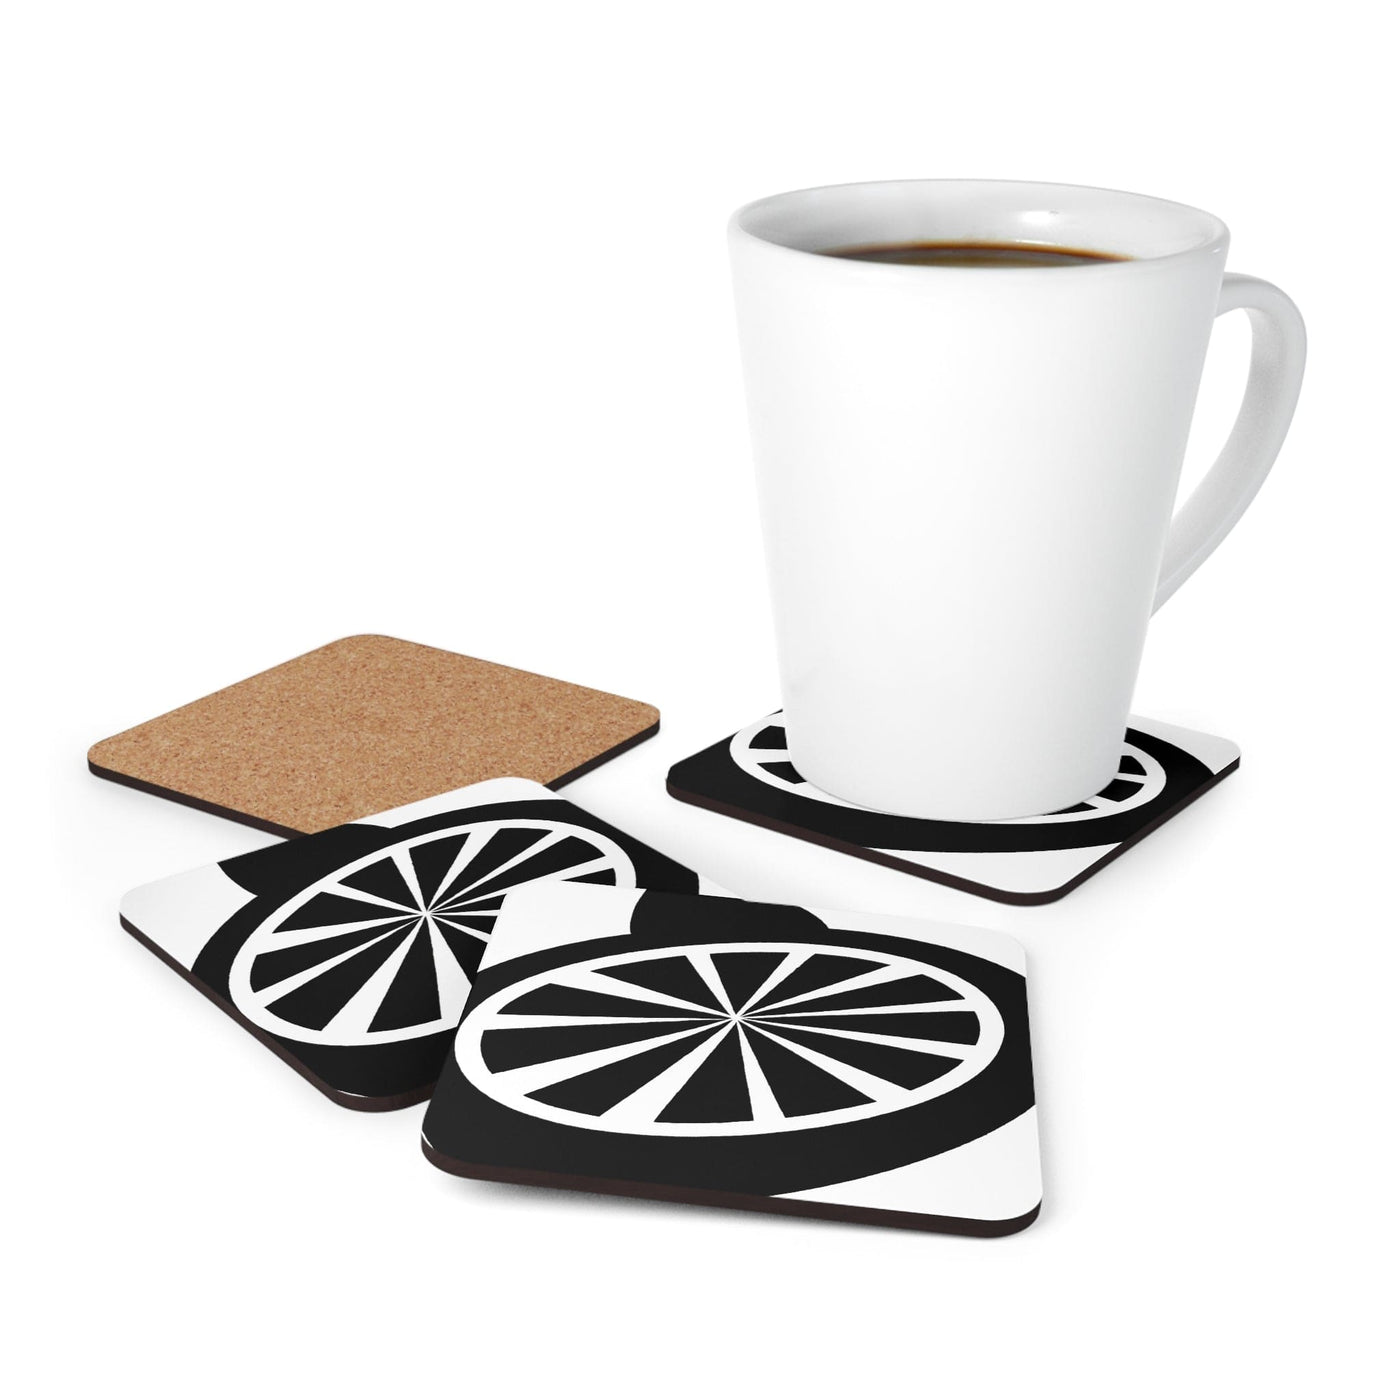 Handcrafted Square Coaster Set Of 4 For Drinks And Cups Black White Geometric